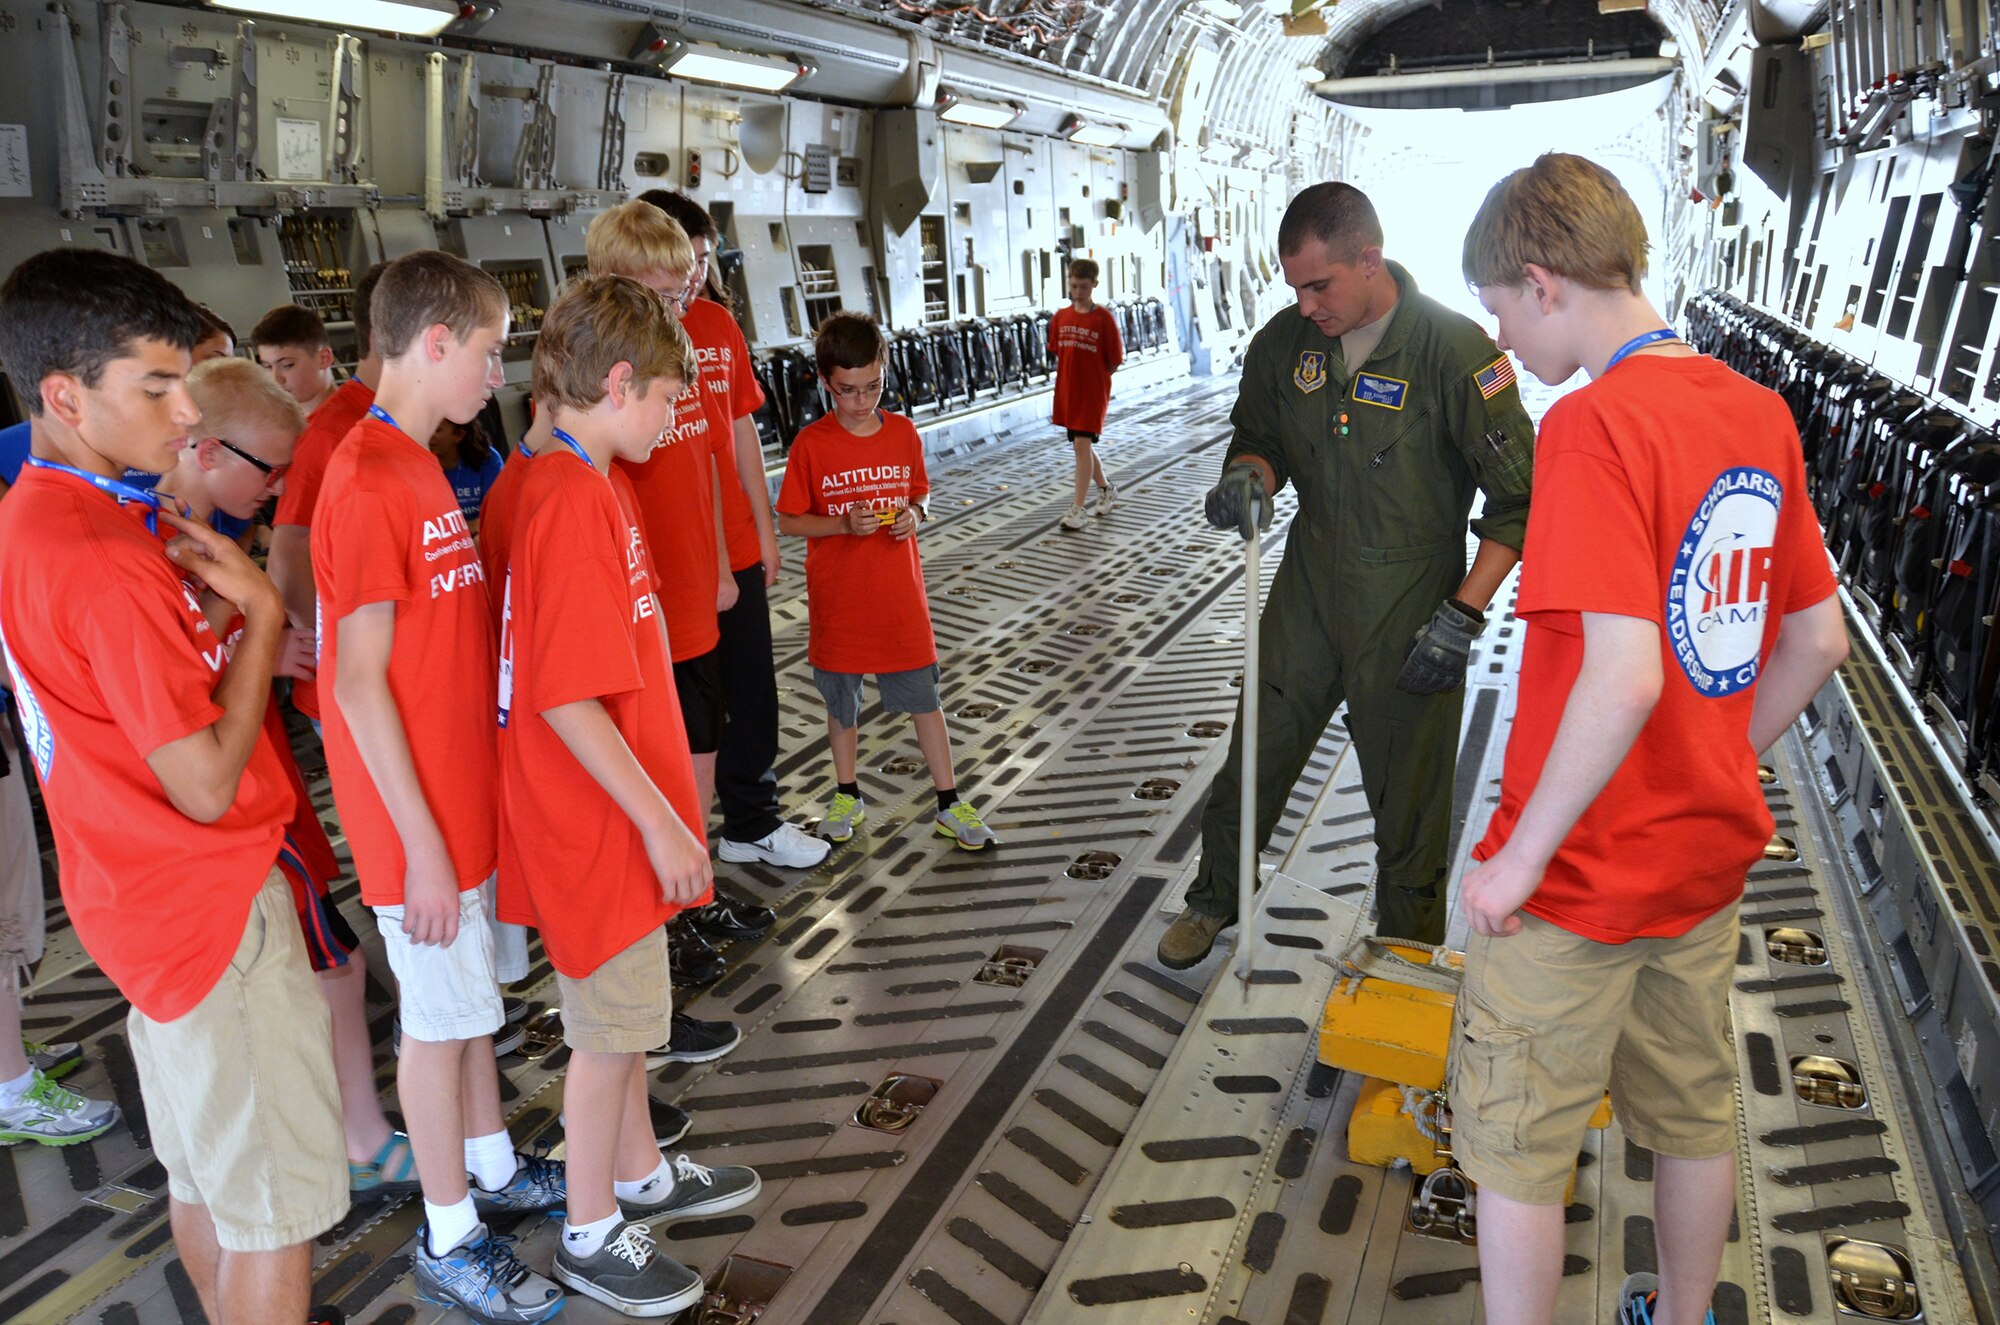 WRIGHT-PATTERSON AIR FORCE BASE, Ohio – Staff Sgt. Rob Schnelle, 89th Airlift Squadron loadmaster, shows participants from the 2013 Air Camp the cargo area of a C-17 Globemaster III during the group’s visit to the 445th Airlift Wing June 17. Air Camp is a week-long summer camp for middle school students to learn about aviation and the science, technology, engineering and mathematics of aeronautics. The program is the vision of Dayton-area leaders who want to help young people nationwide achieve their potential, develop critical-thinking and problem-solving skills, and pursue further education and future careers in STEM-related fields and aviation. (U.S. Air Force photo/Master Sgt. Charles Miller)